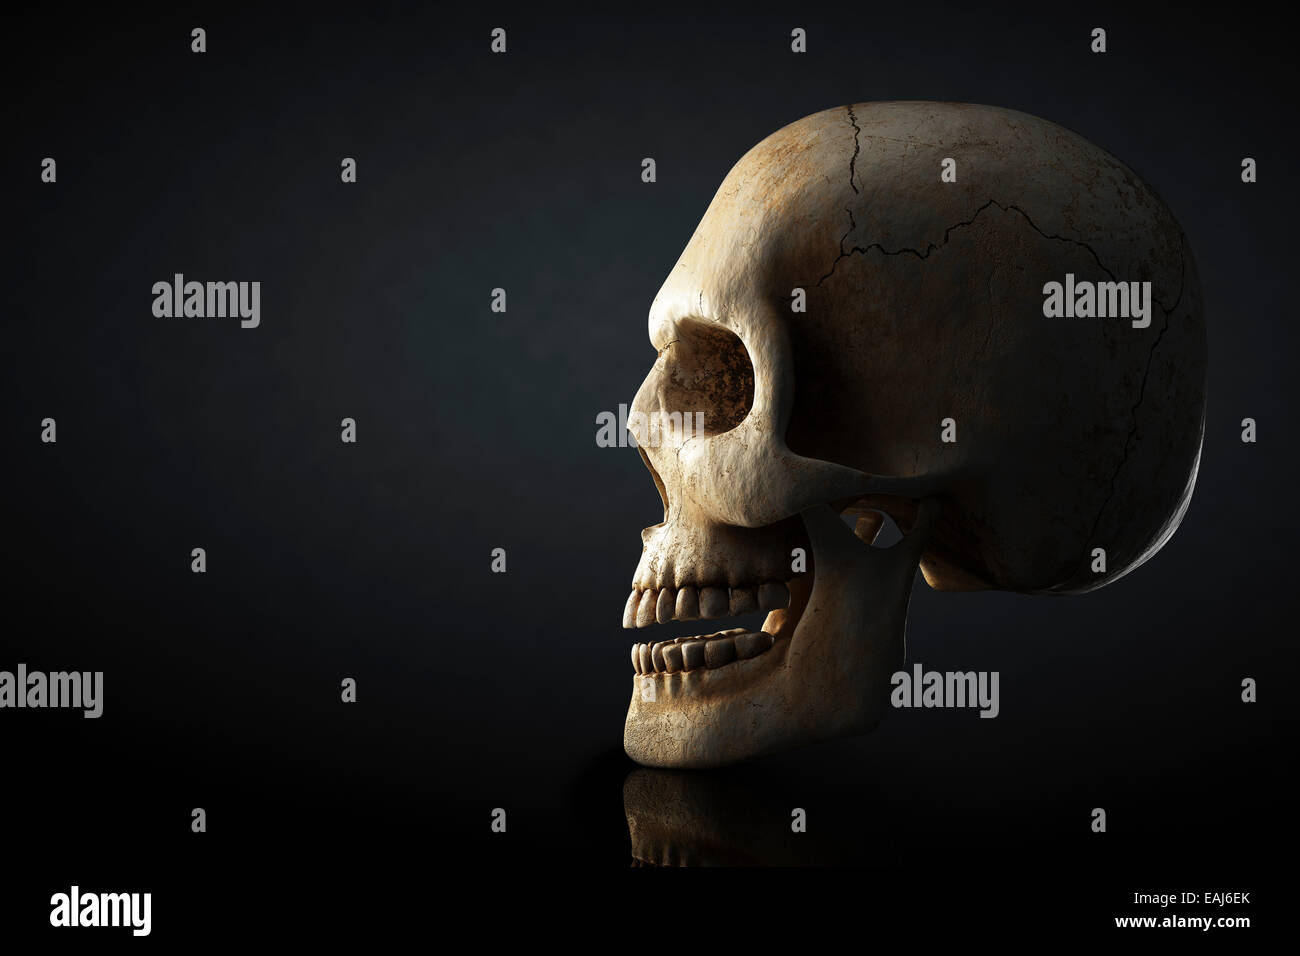 Human skull still life with side view on dark background - 3D artwork Stock Photo